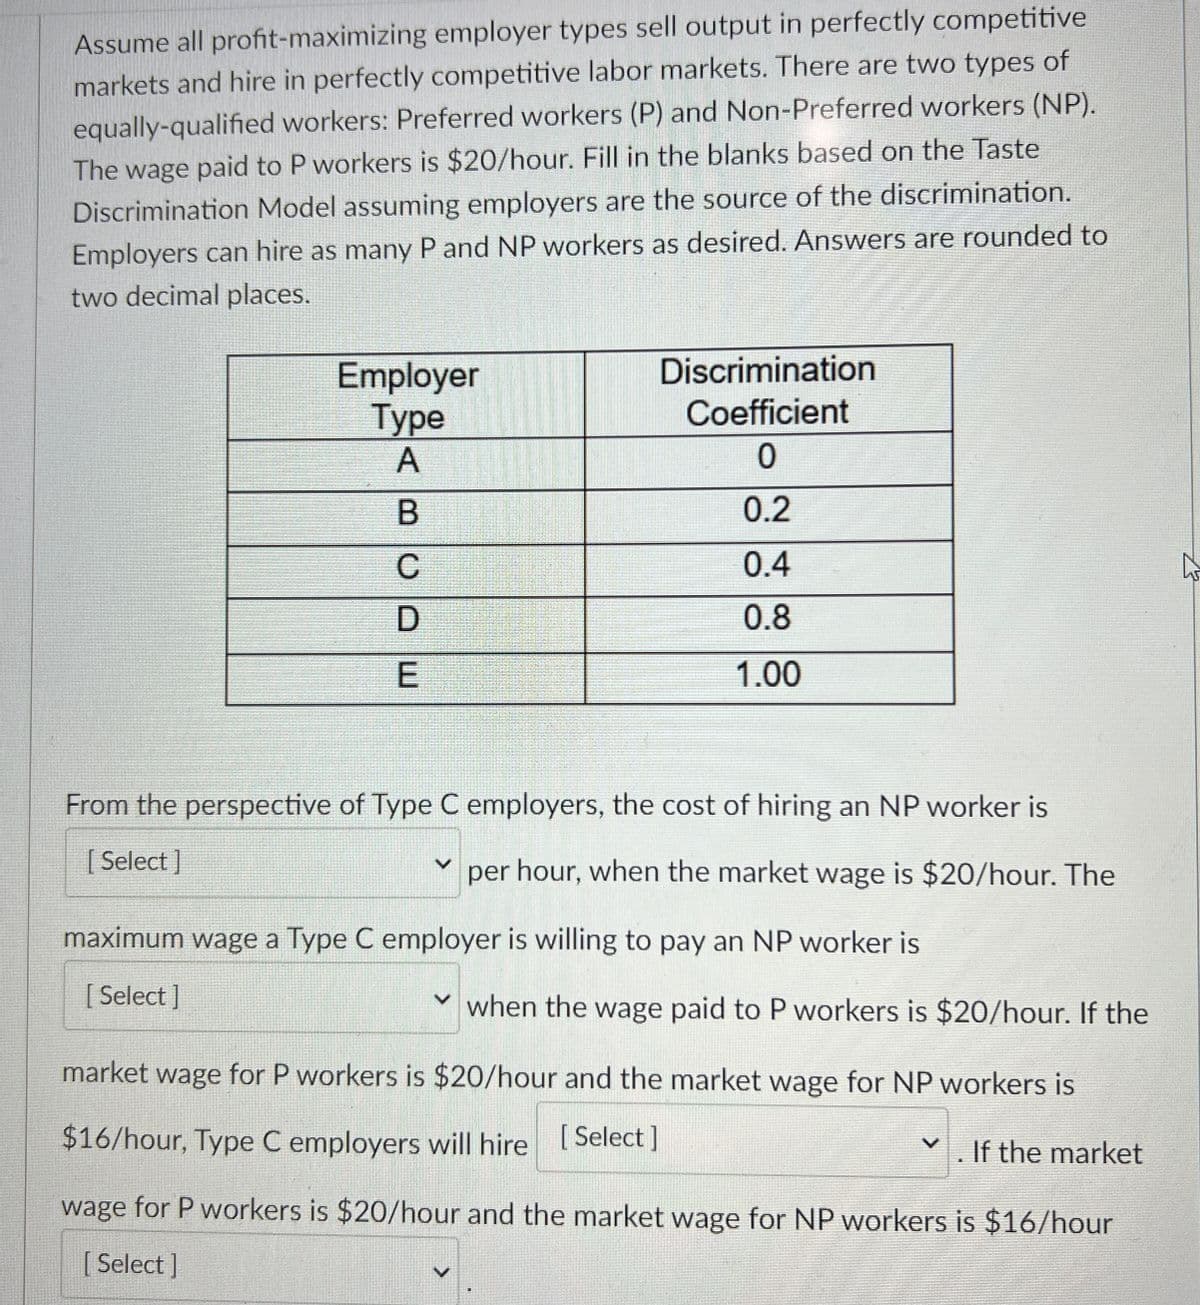 Assume all profit-maximizing employer types sell output in perfectly competitive
markets and hire in perfectly competitive labor markets. There are two types of
equally-qualified workers: Preferred workers (P) and Non-Preferred workers (NP).
The wage paid to P workers is $20/hour. Fill in the blanks based on the Taste
Discrimination Model assuming employers are the source of the discrimination.
Employers can hire as many P and NP workers as desired. Answers are rounded to
two decimal places.
Employer
Type
Discrimination
Coefficient
A
0
BCDE
0.2
0.4
0.8
1.00
From the perspective of Type C employers, the cost of hiring an NP worker is
[Select]
per hour, when the market wage is $20/hour. The
maximum wage a Type C employer is willing to pay an NP worker is
[Select]
when the wage paid to P workers is $20/hour. If the
market wage for P workers is $20/hour and the market wage for NP workers is
$16/hour, Type C employers will hire [Select]
If the market
wage for P workers is $20/hour and the market wage for NP workers is $16/hour
[Select]